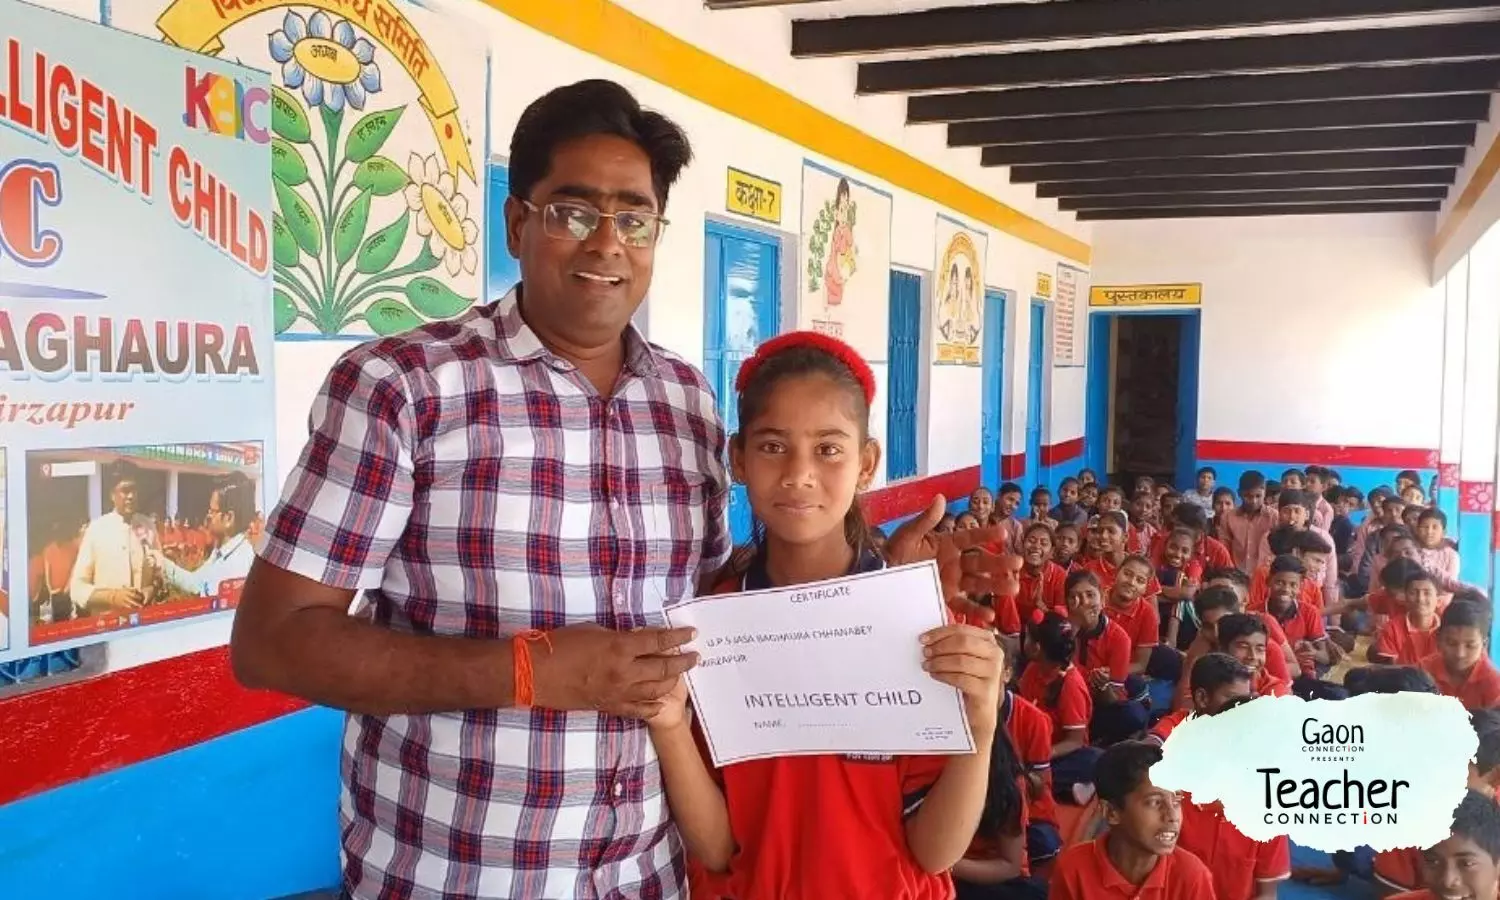 Amitabh Bachchan’s KBC show finds a new avatar at this govt school in Mirzapur